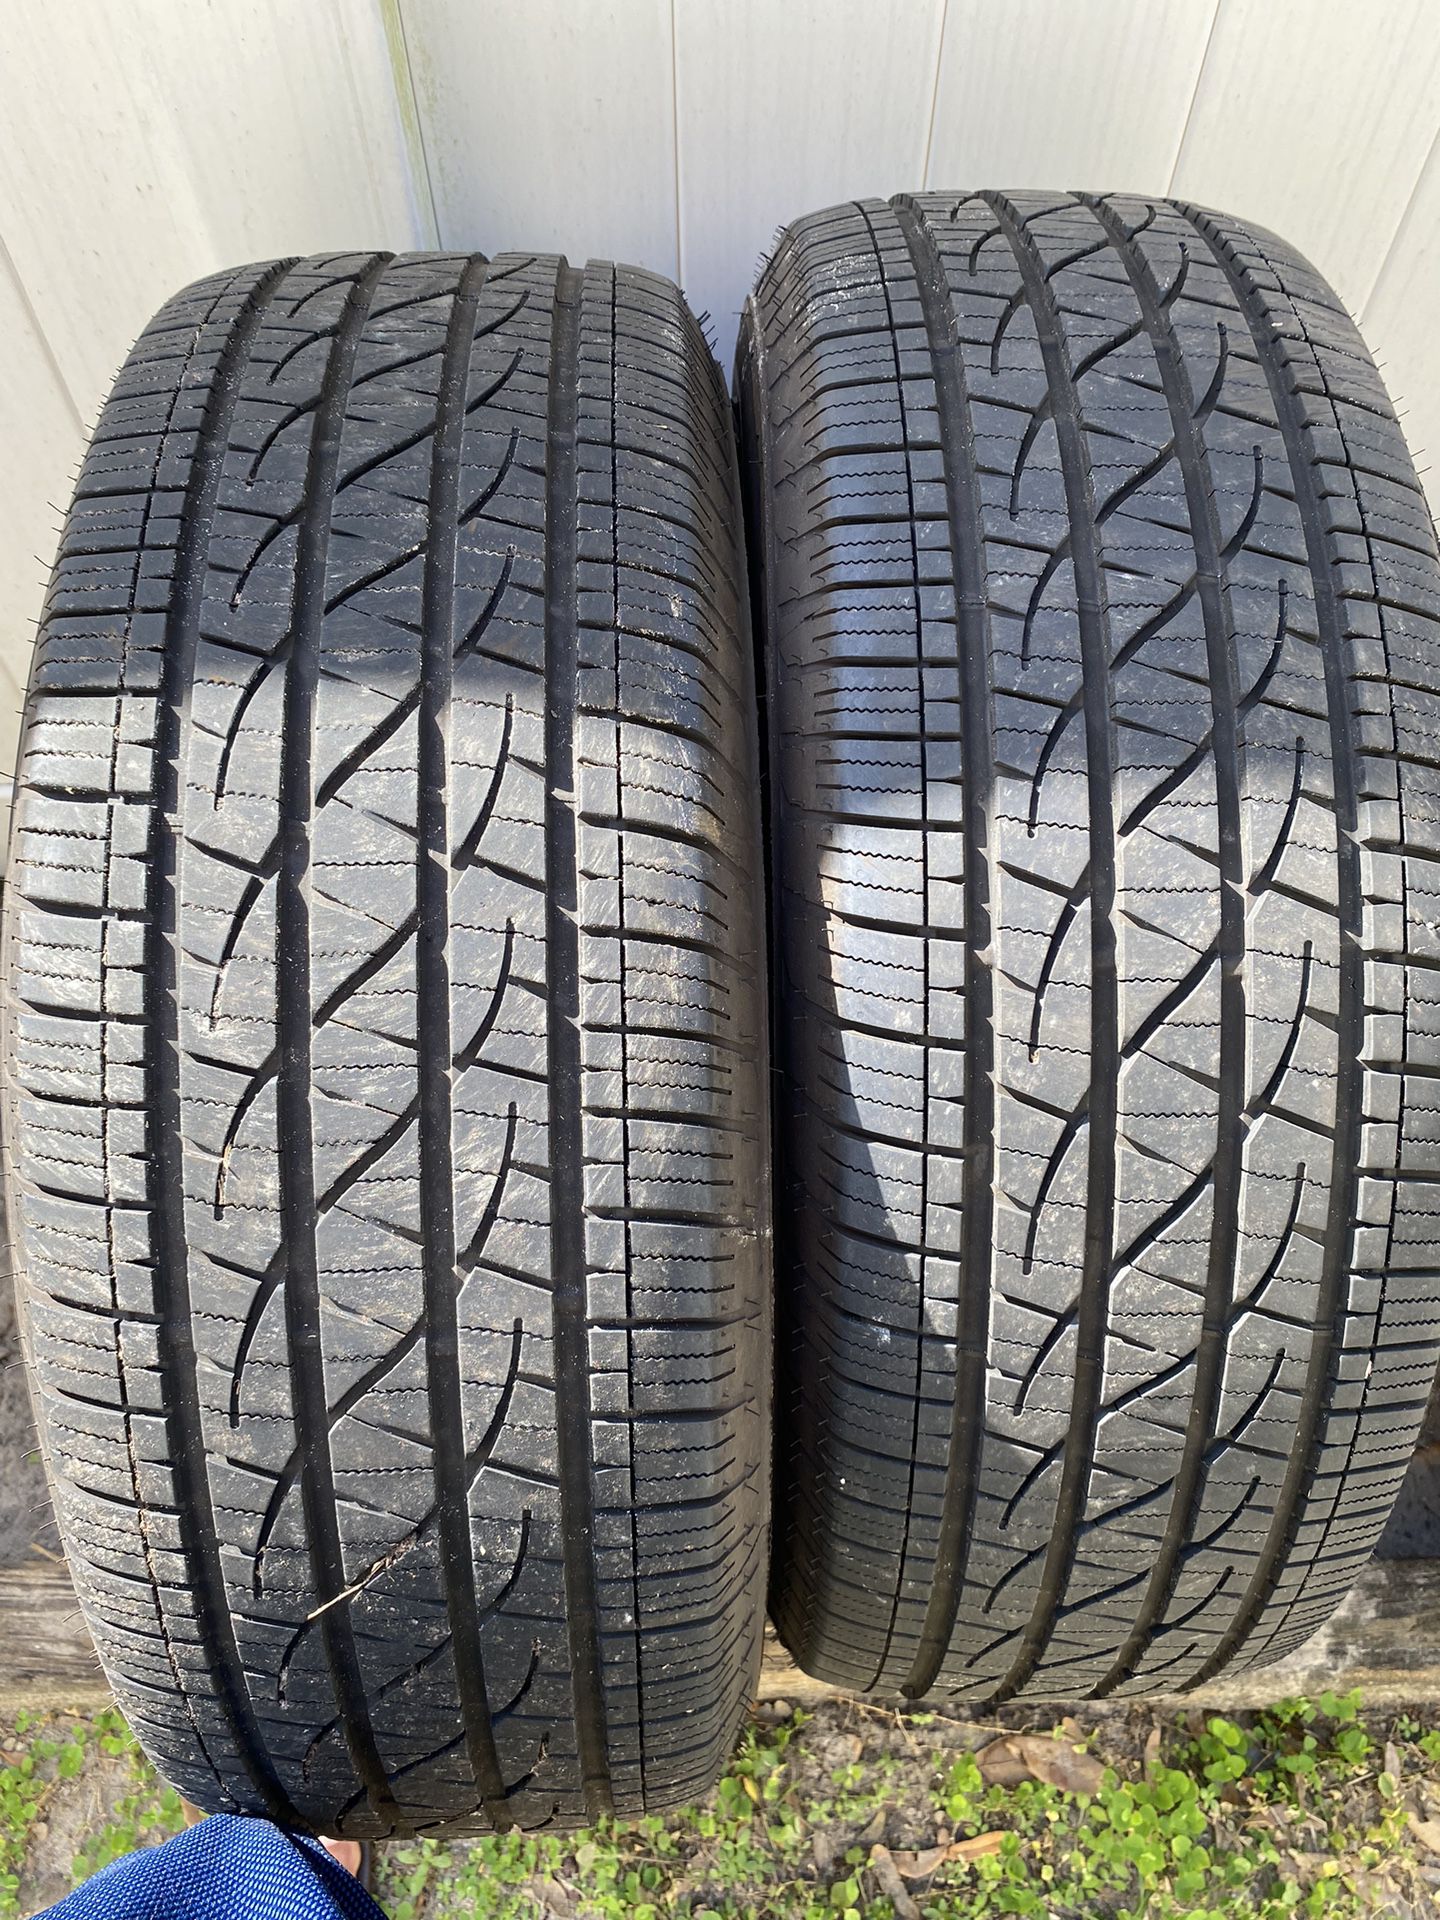 Hi I Have A Pair Of Two 275/65/18 Firestone Tires